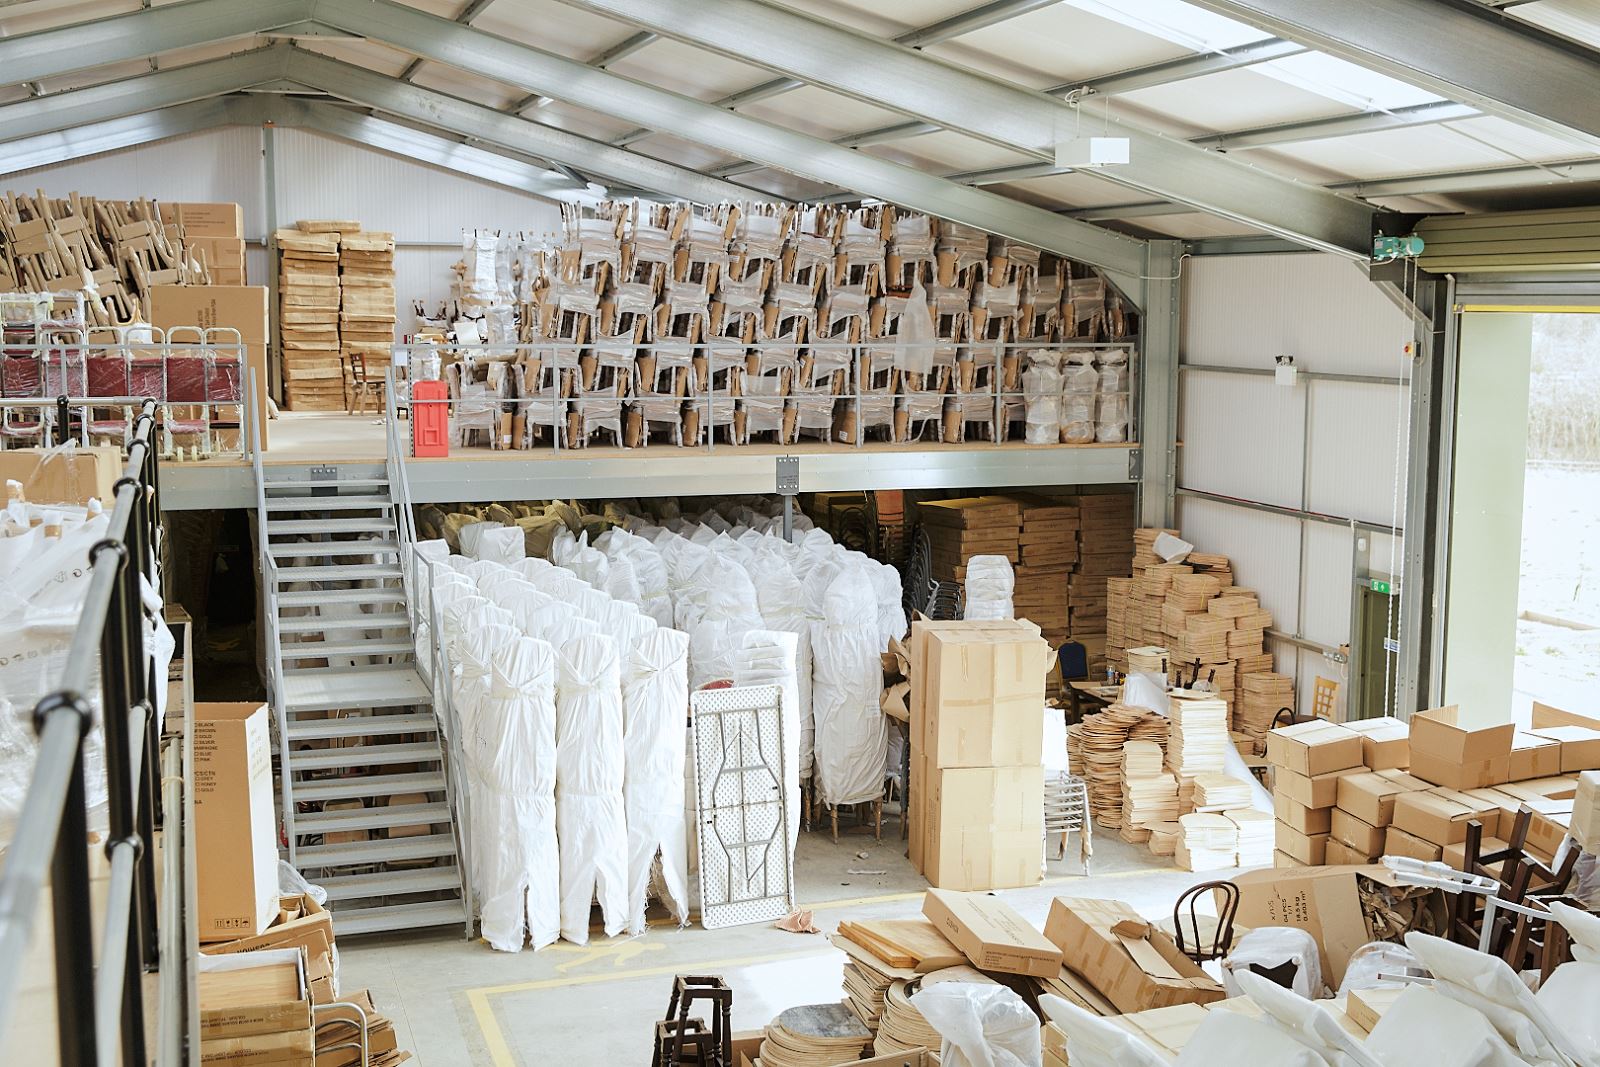 Trent Furniture warehouse and storage facilities